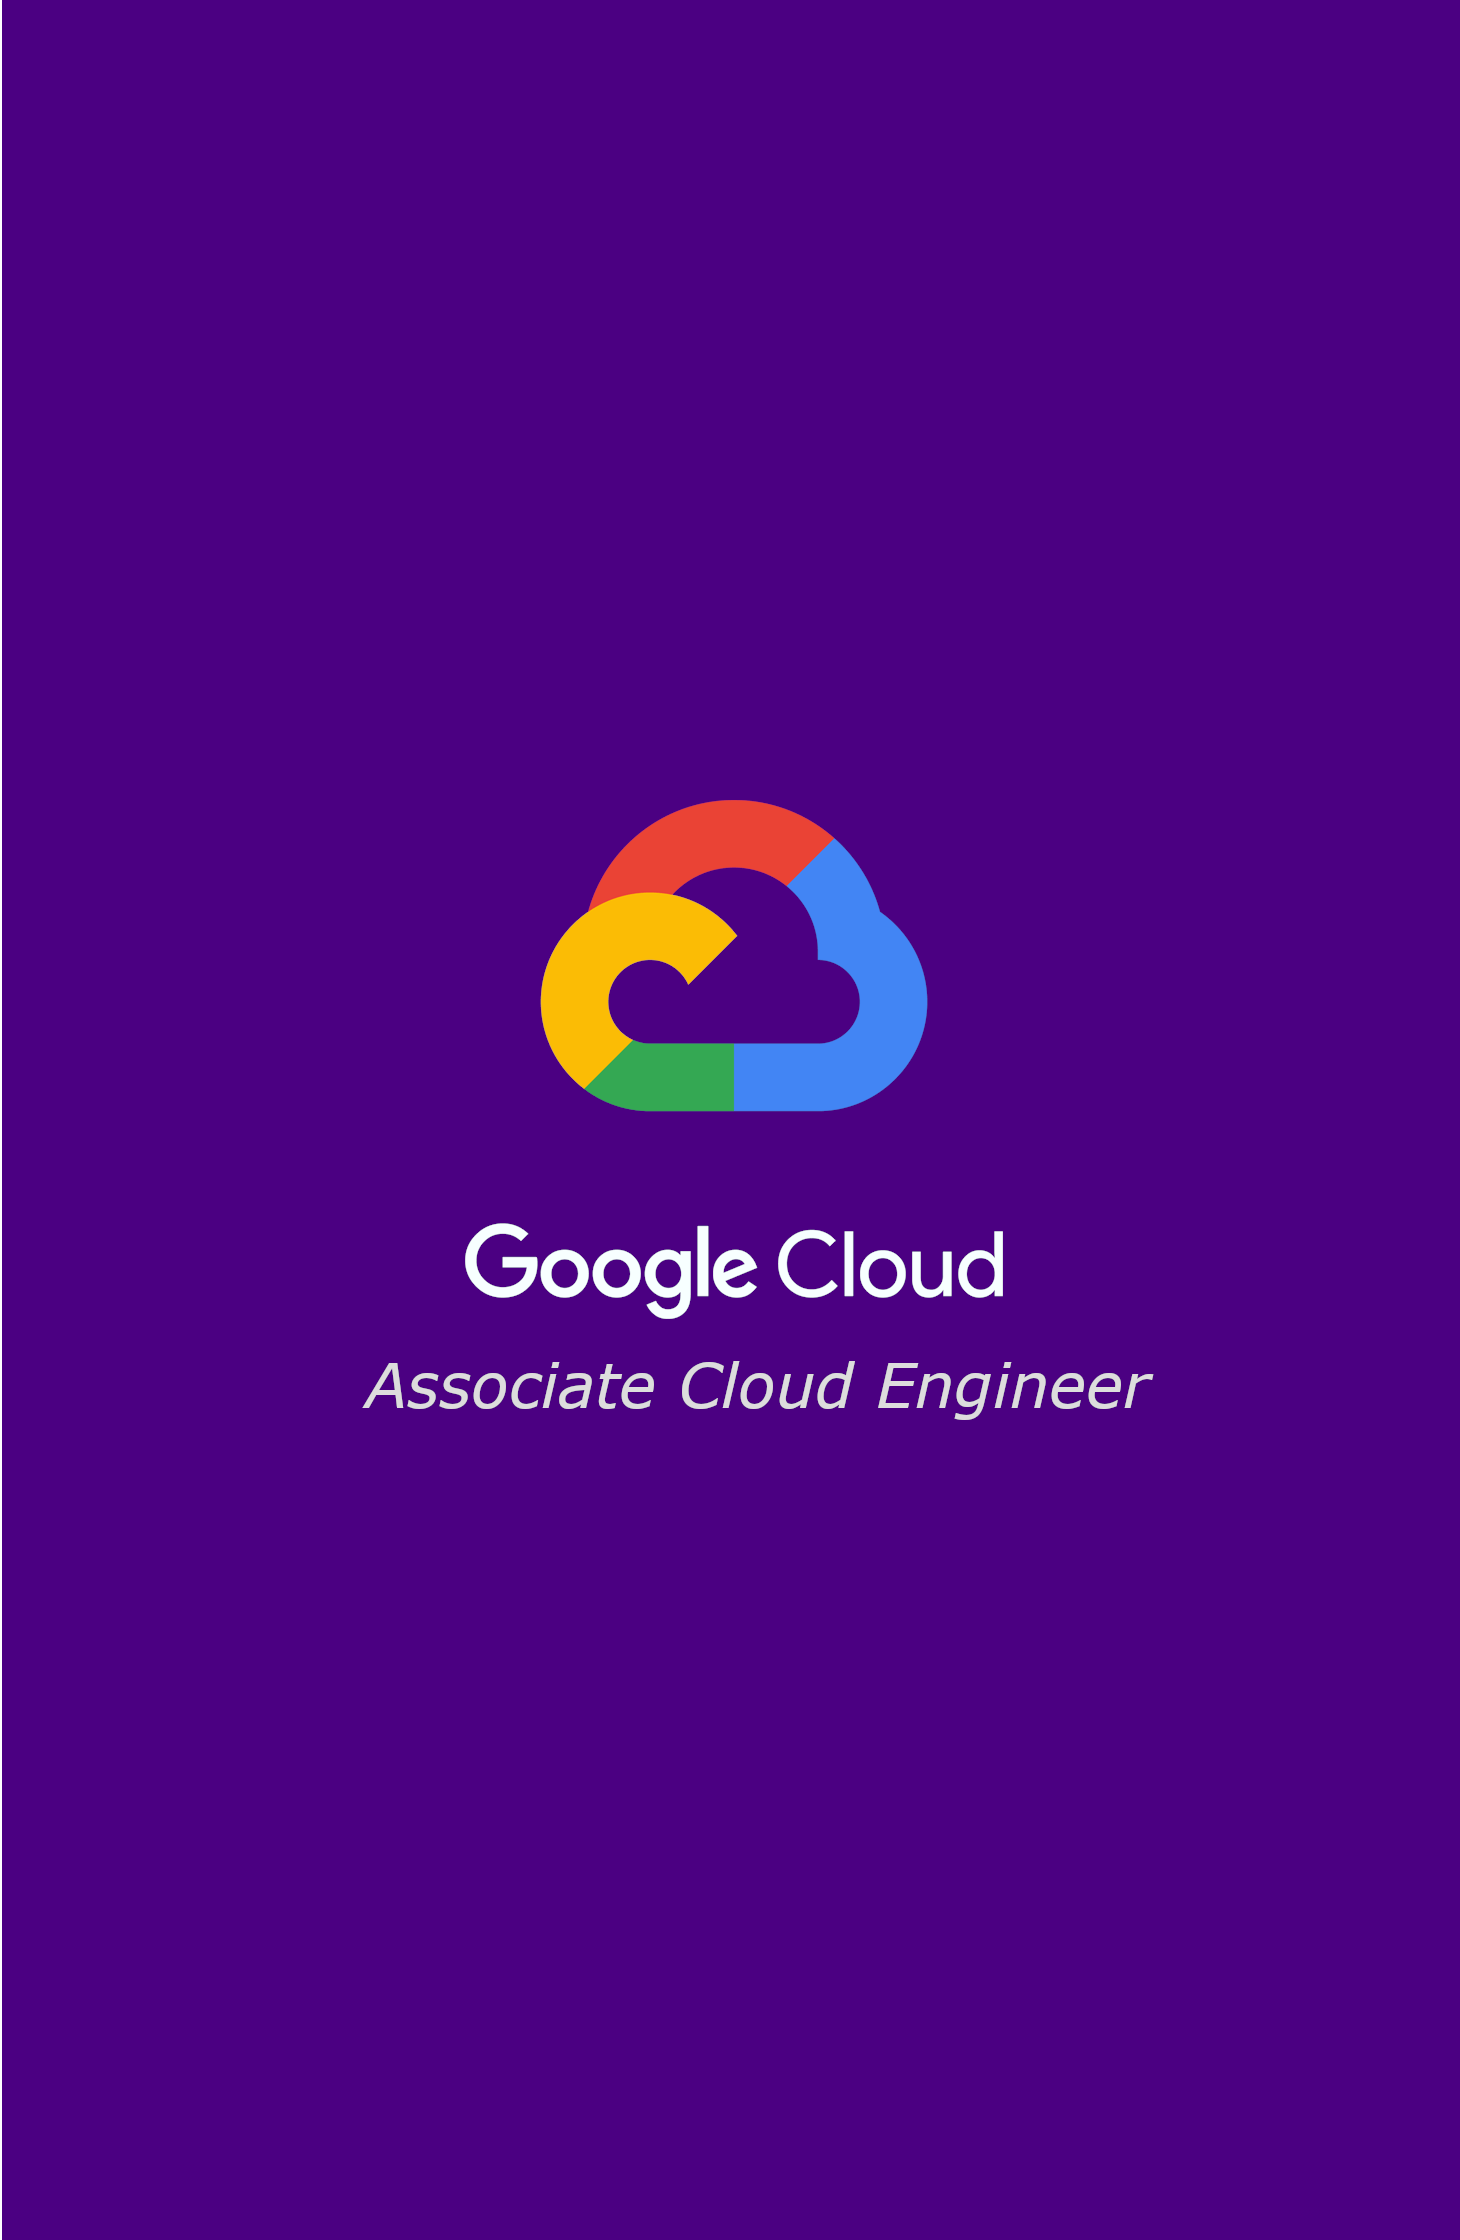 Google Cloud Fundamentals: Core Infraestructure - Resource and access in the cloud -> Interacting with the Google Cloud